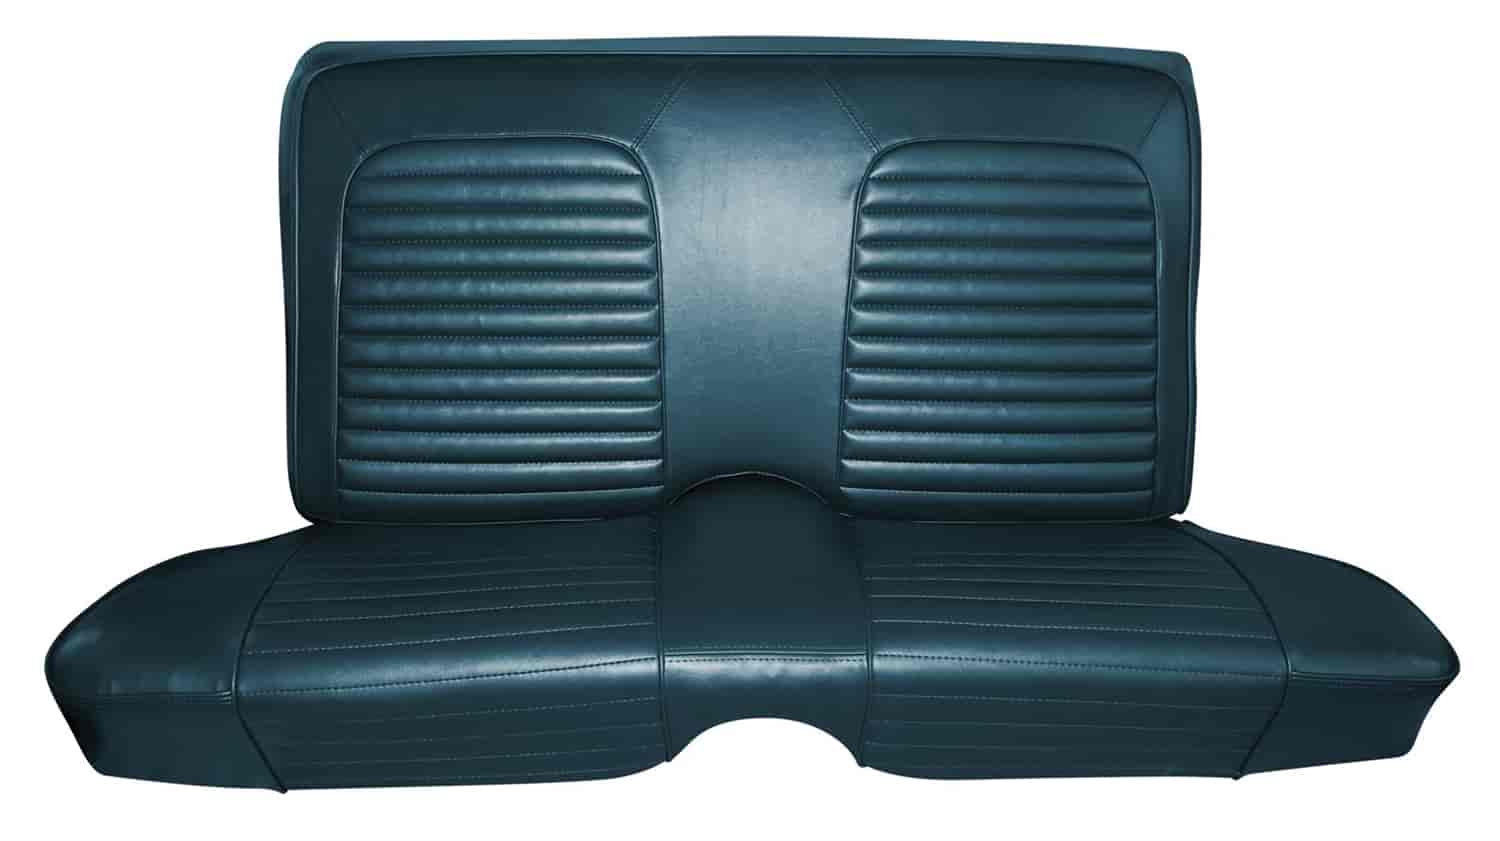 1963 Ford Falcon Futura 2-Door Hardtop Interior Rear Bench Seat Upholstery for Models with Front Bucket Seats